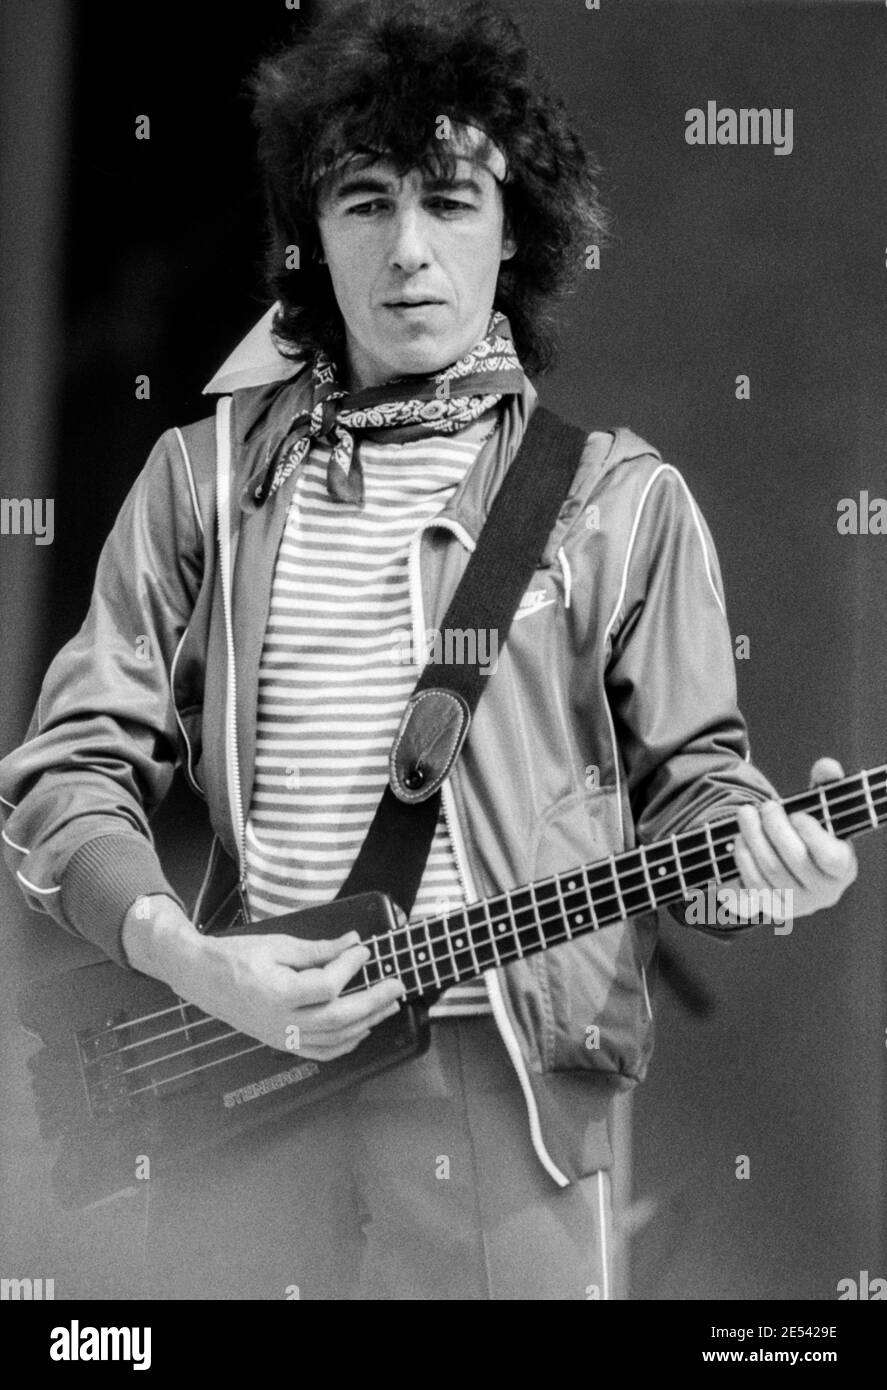 ROTTERDAM, THE NETHERLANDS - JUN 02, 1982: Bassplayer Bill Wyman of The Rolling Stones during a concert in the football stadium of Feyenoord in The Ne Stock Photo